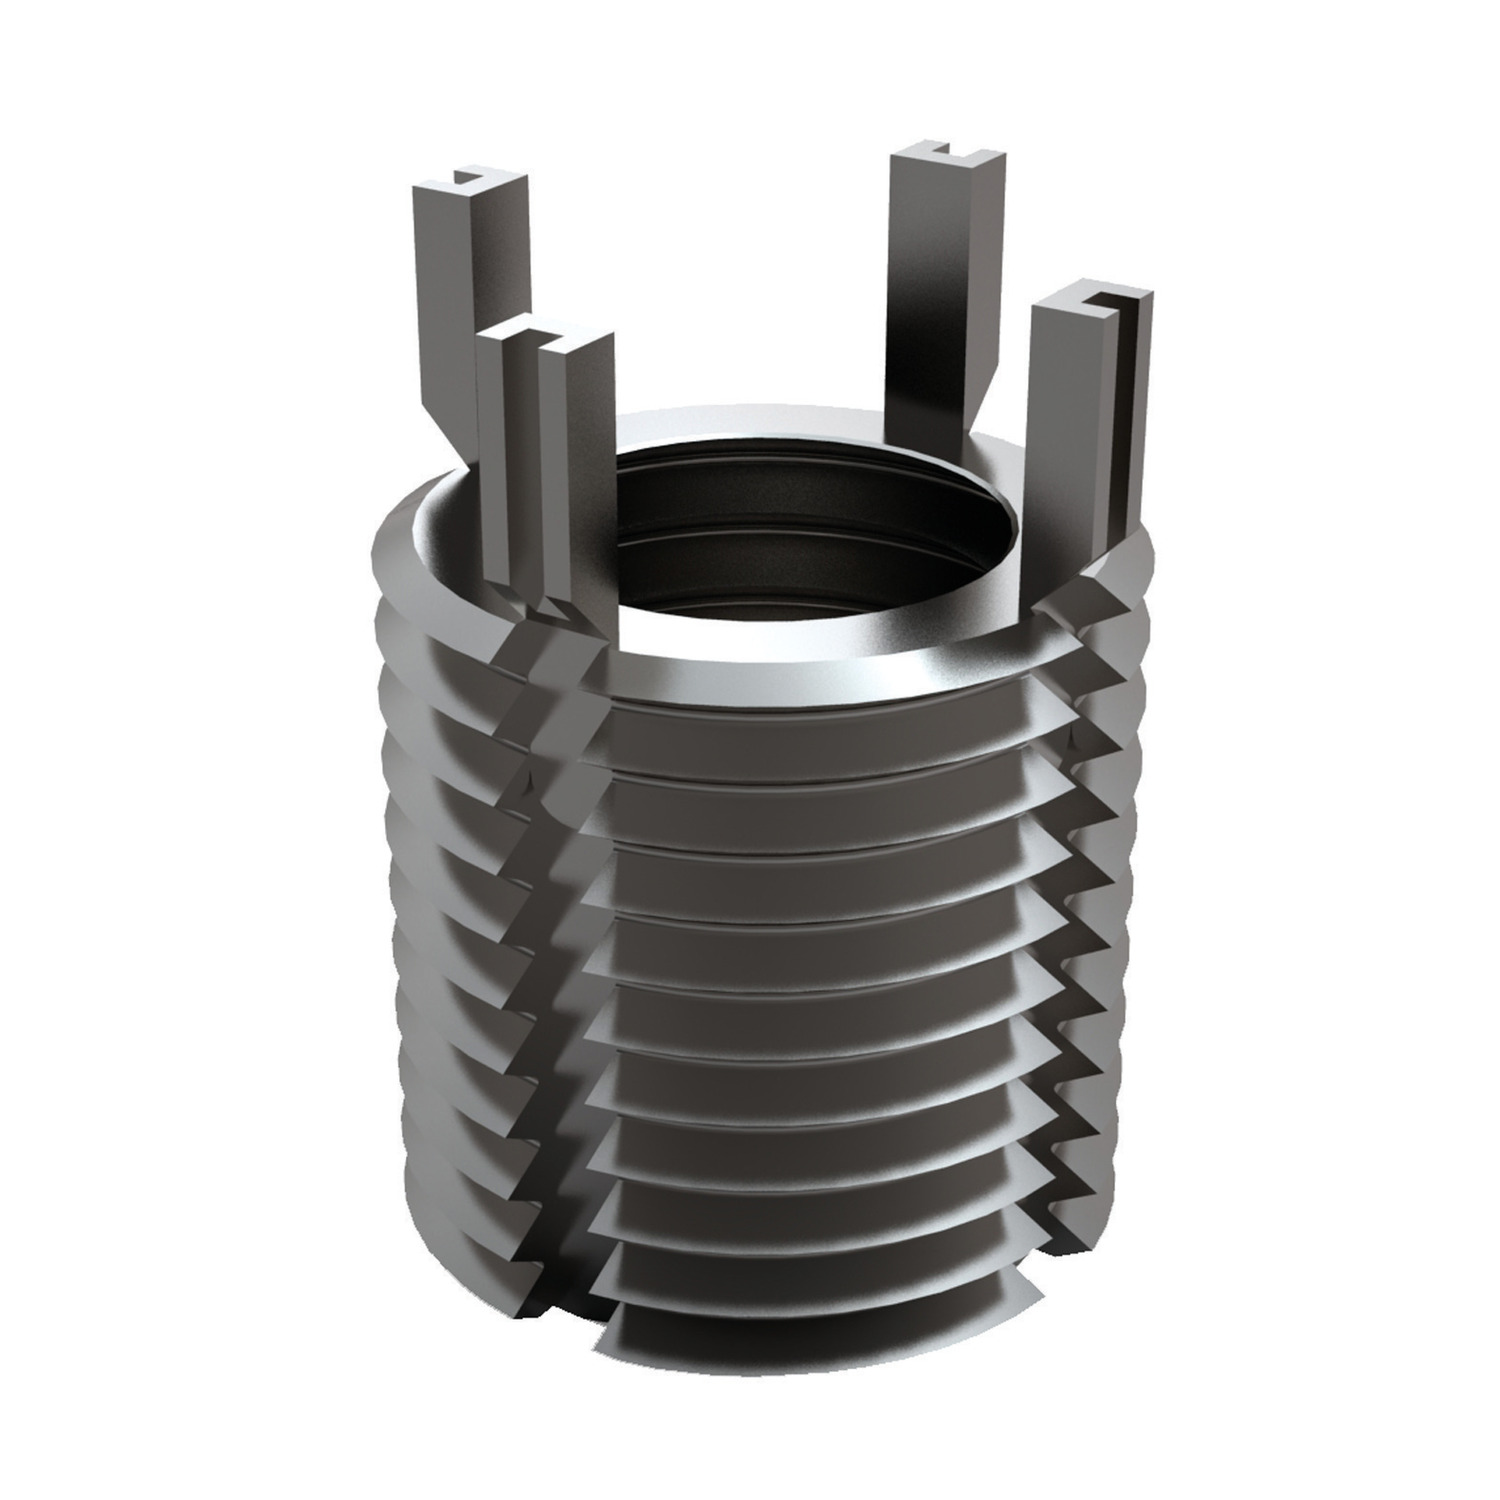 Threaded Insert - Metric Metric threaded stainless thinwall inserts for an inexpensive option to giving a parent hole more strength.